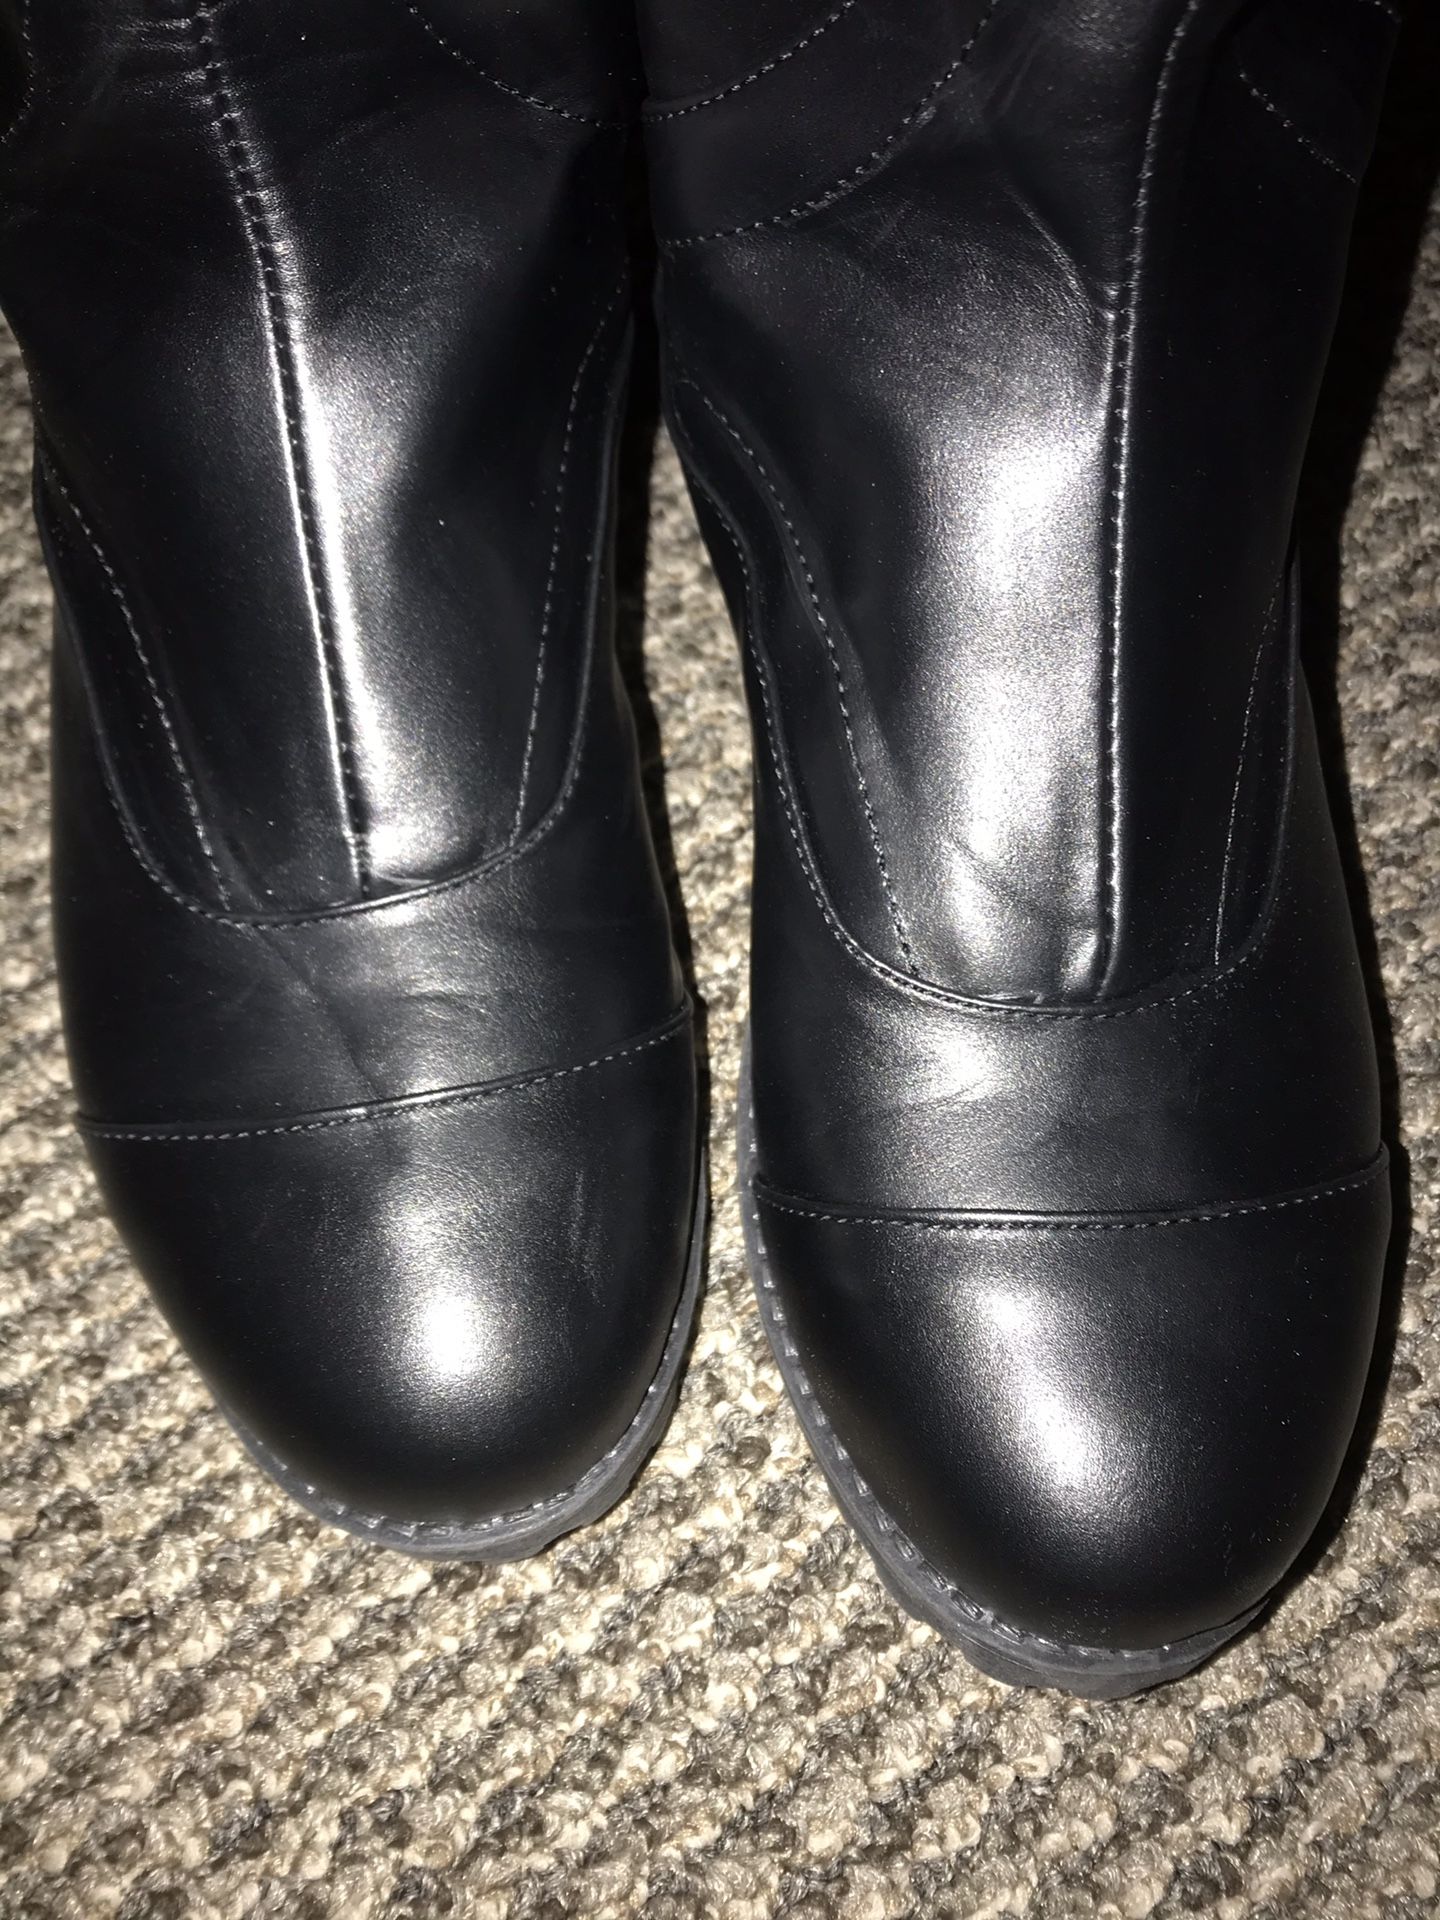 Ladies black tall riding boots size 10- a little narrow.